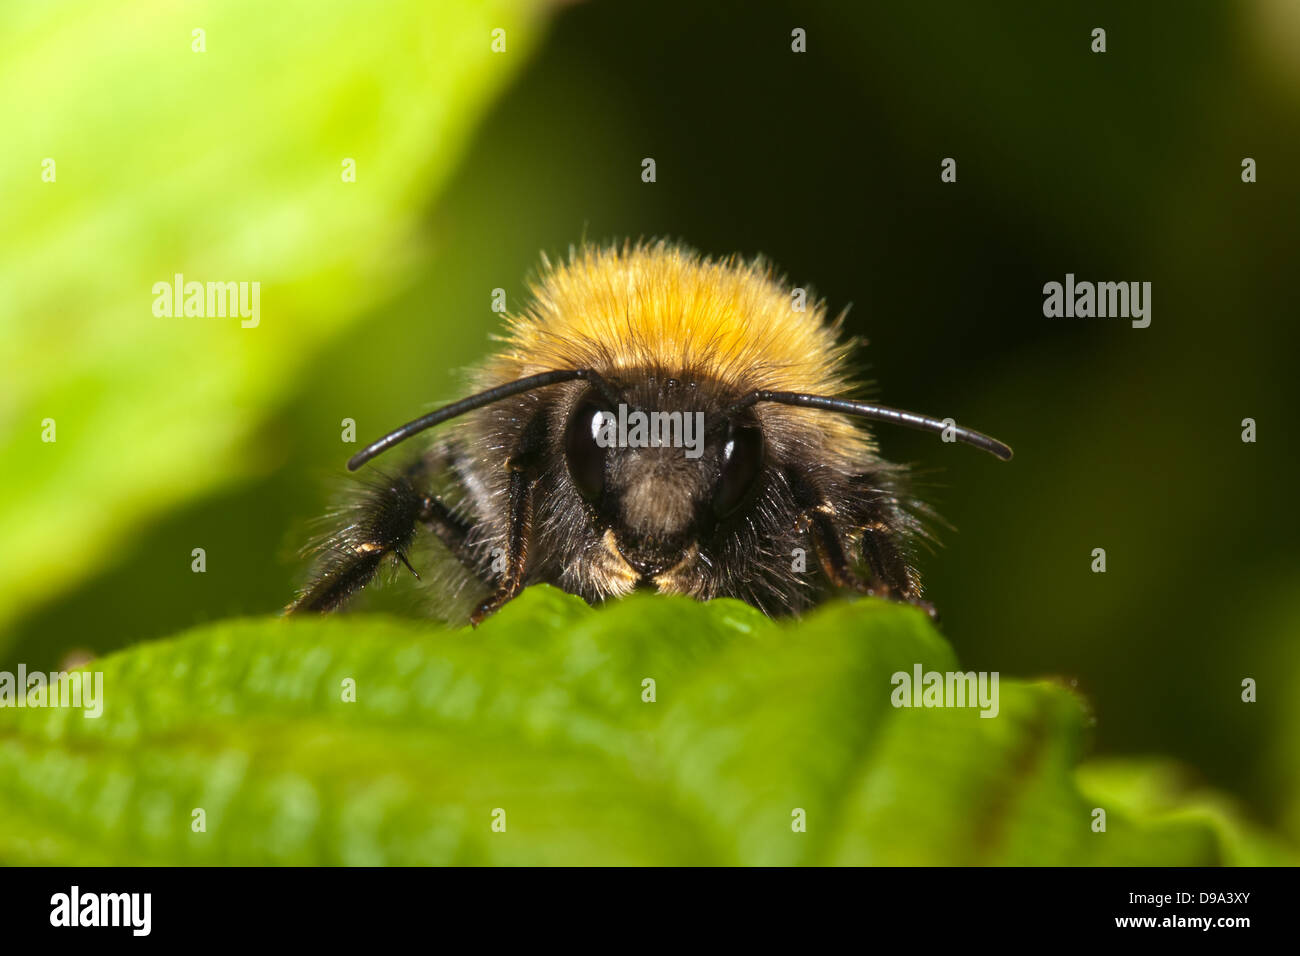 Front on view of the common bumblebee (Bombus terrestris) sitting on a leaf. Stock Photo